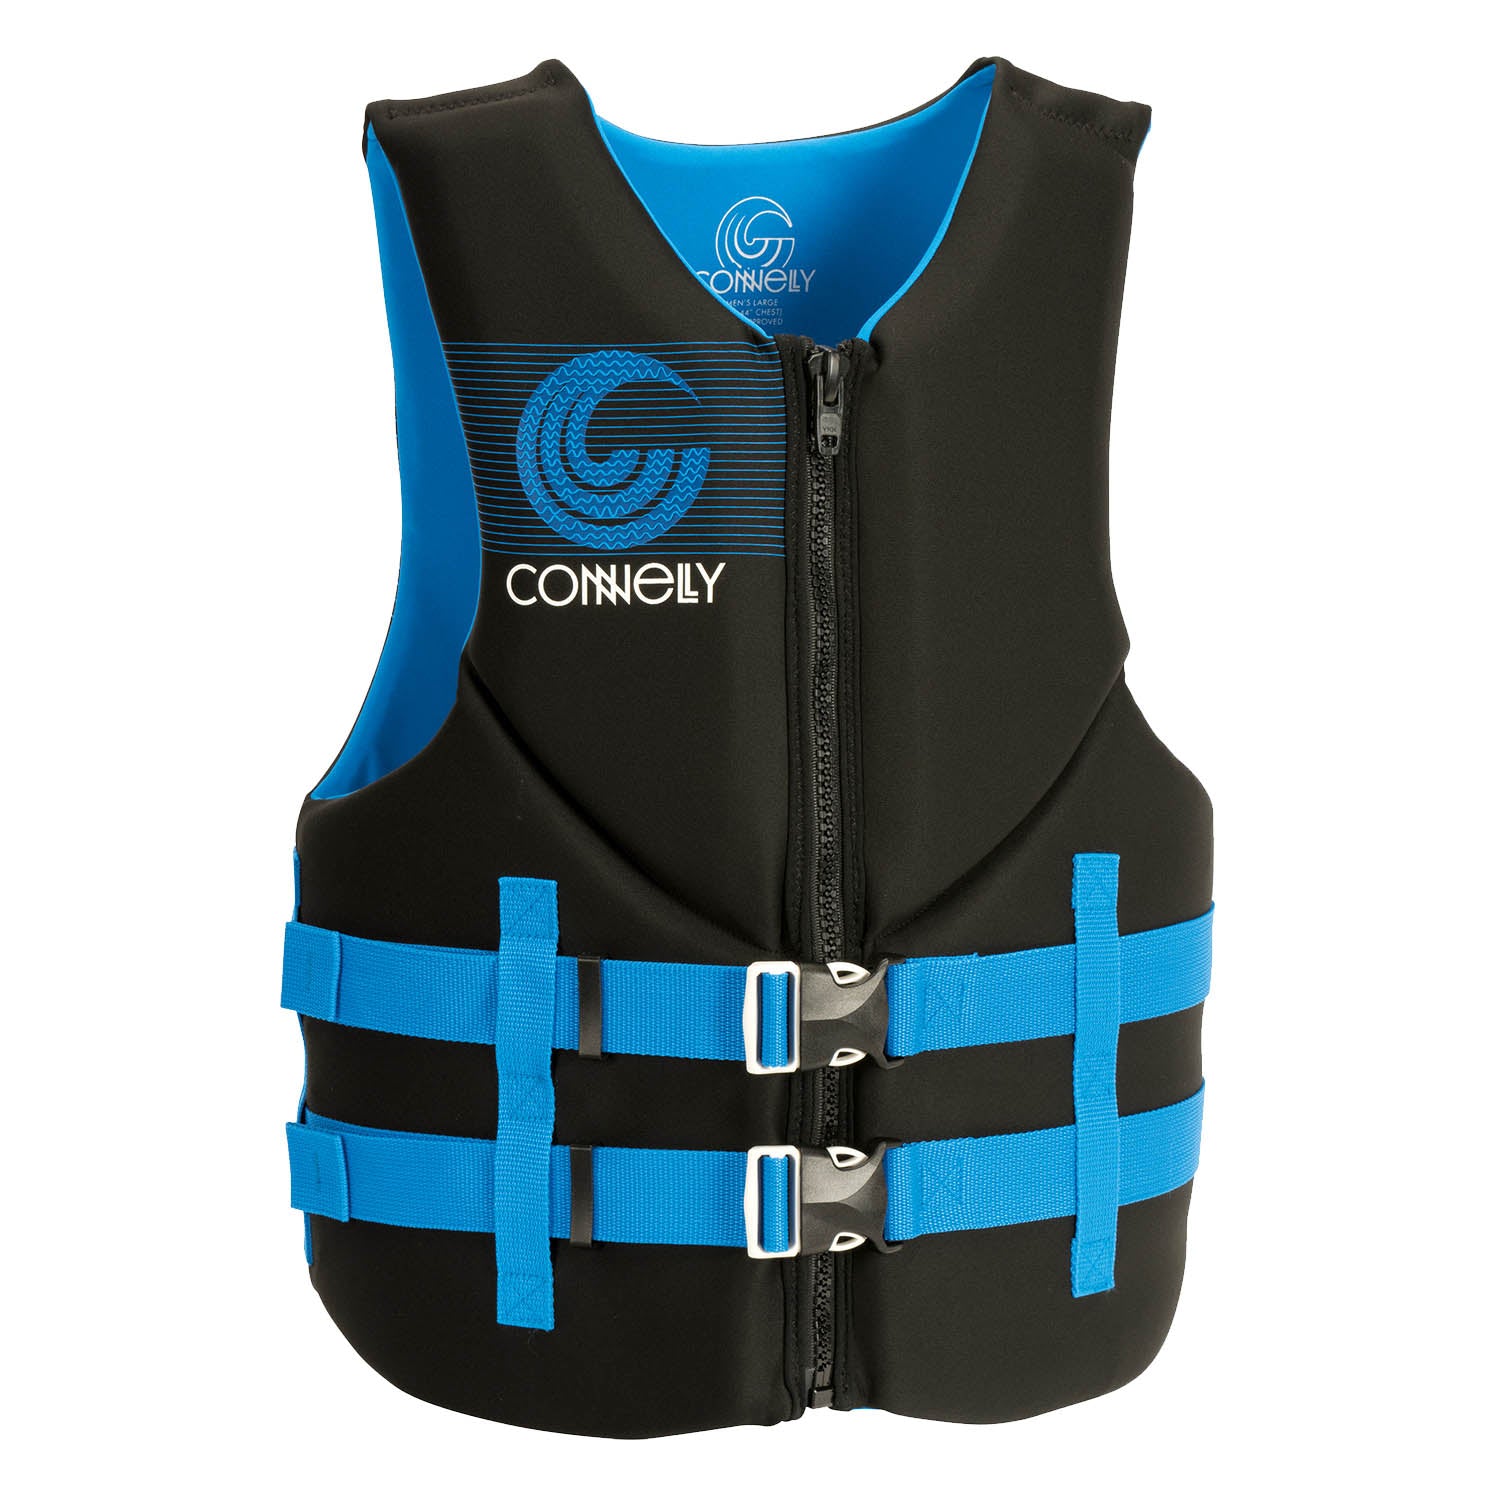 Connelly Promo Vest 2021